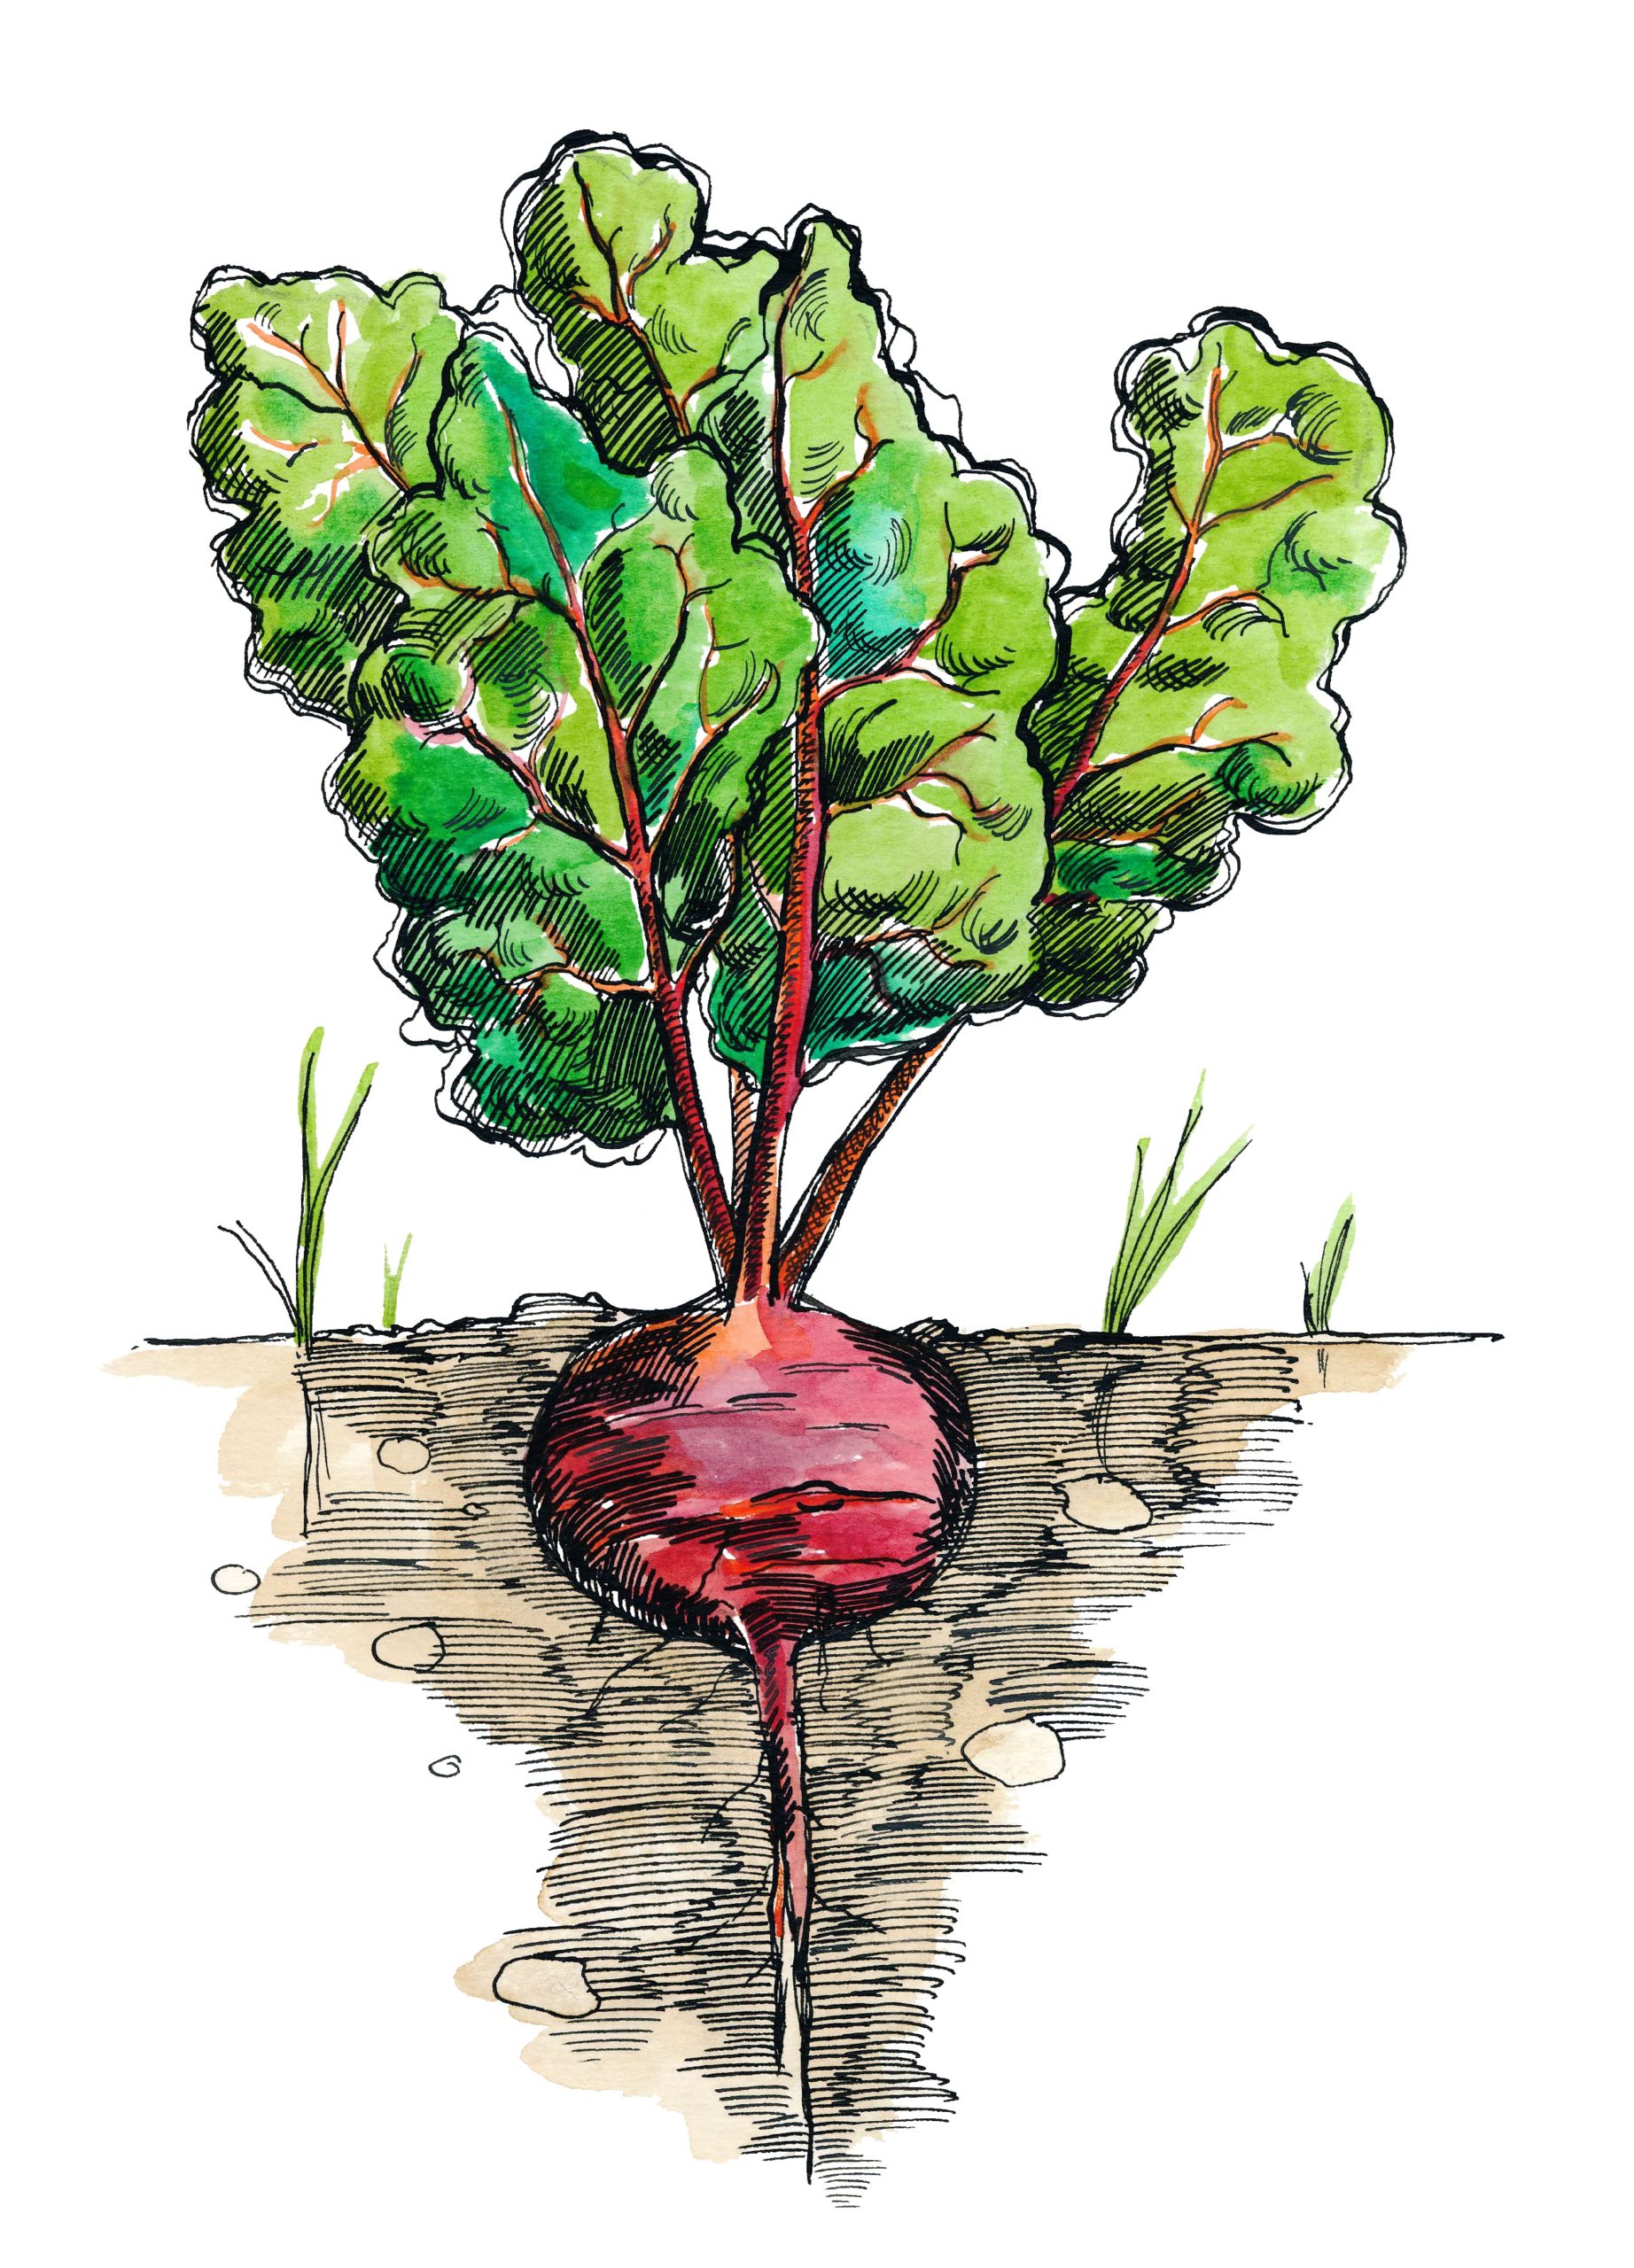 watercolor illustration of beets